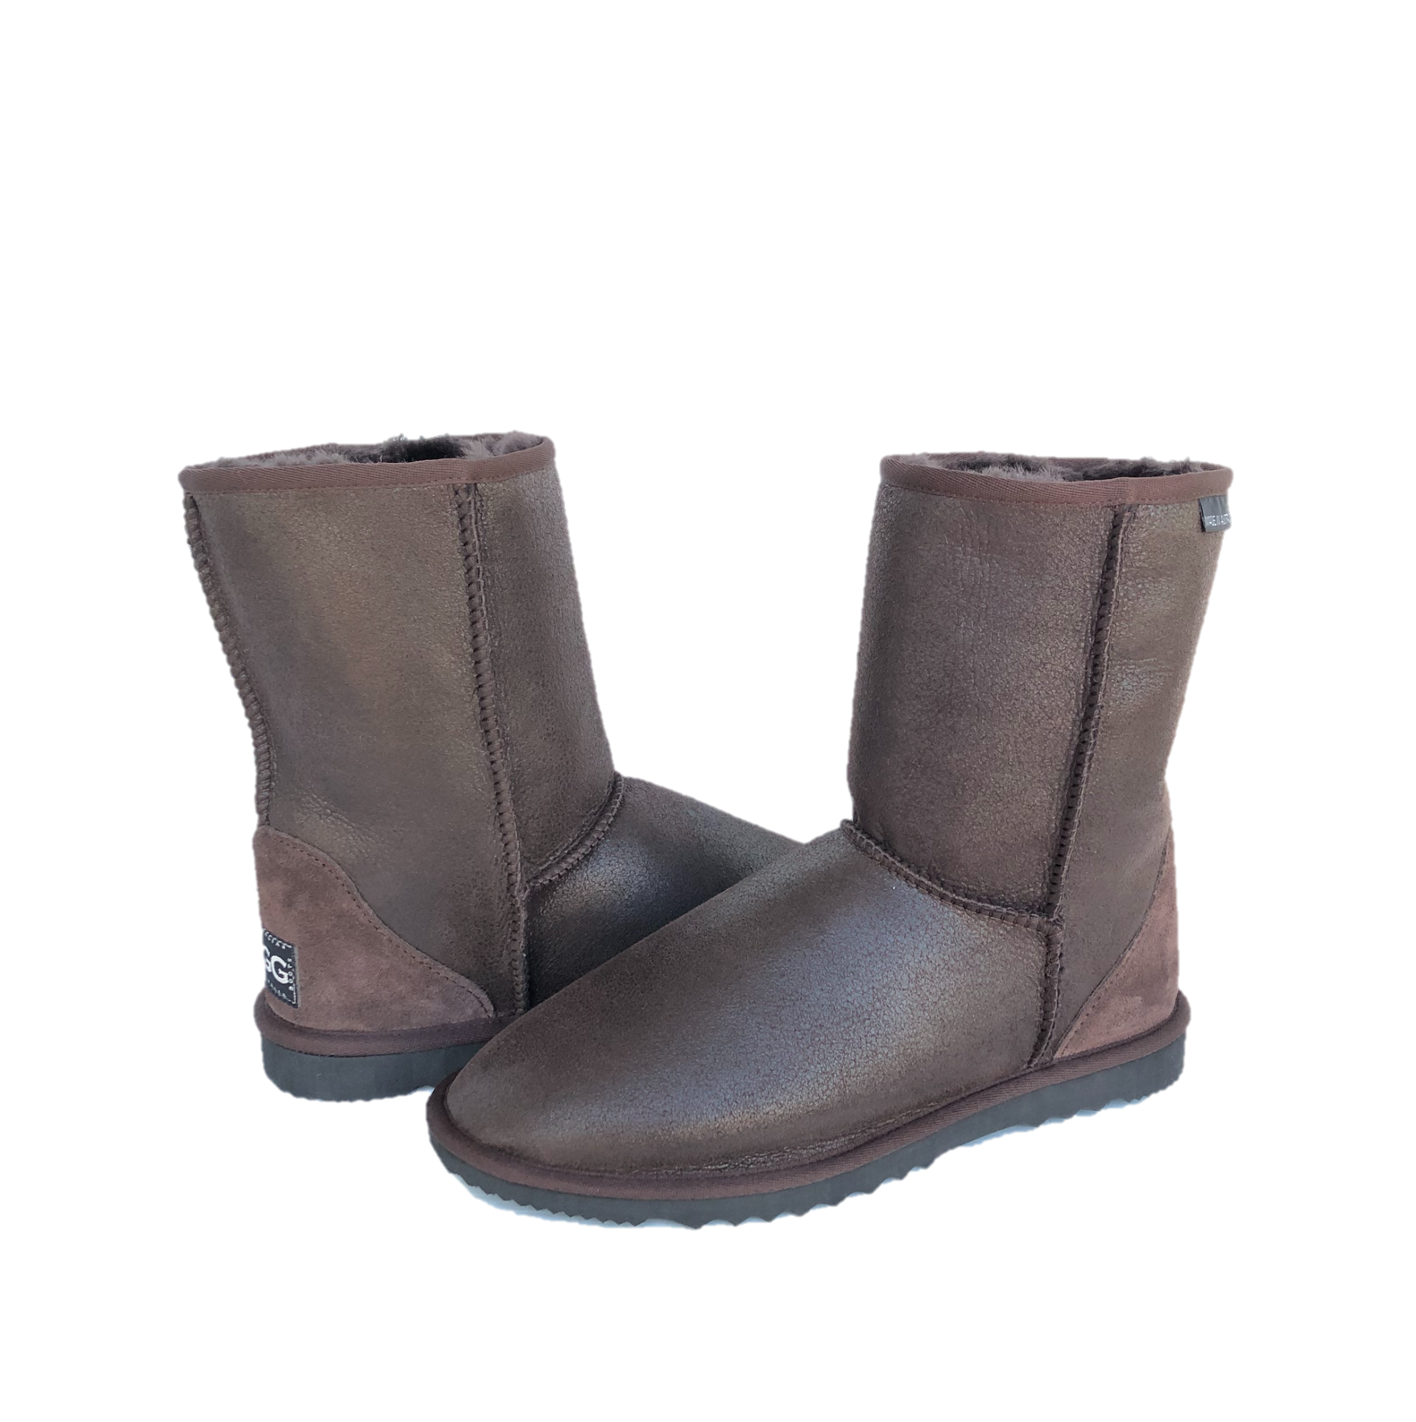 Men's Aviator Boots in distressed leather - chocolate colour